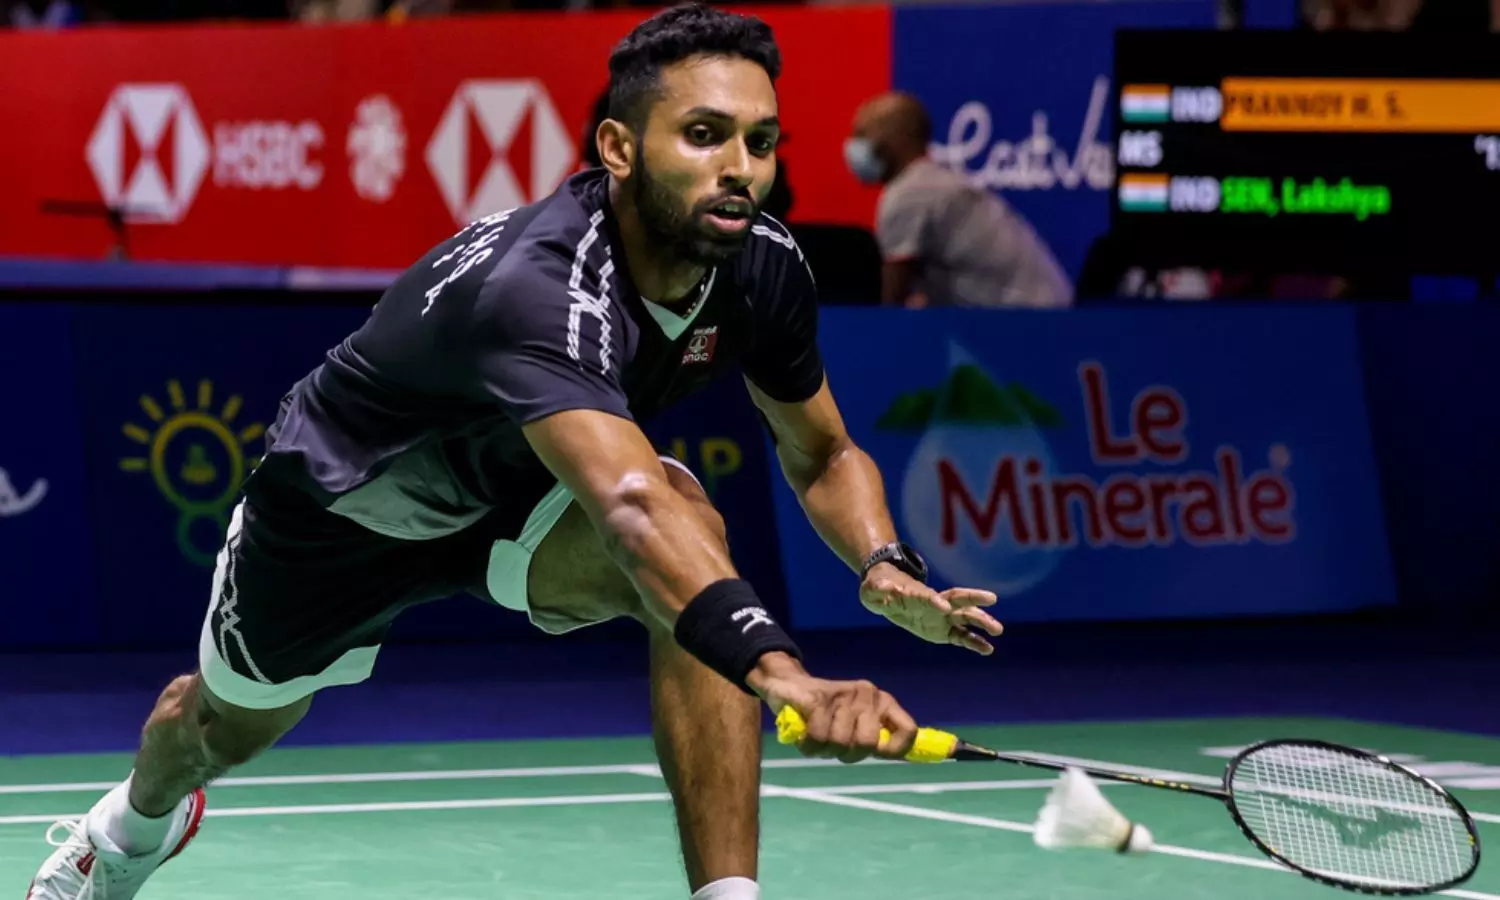 BWF World Tour Finals HS Prannoy placed in tough Group A, to play against Viktor Axelsen